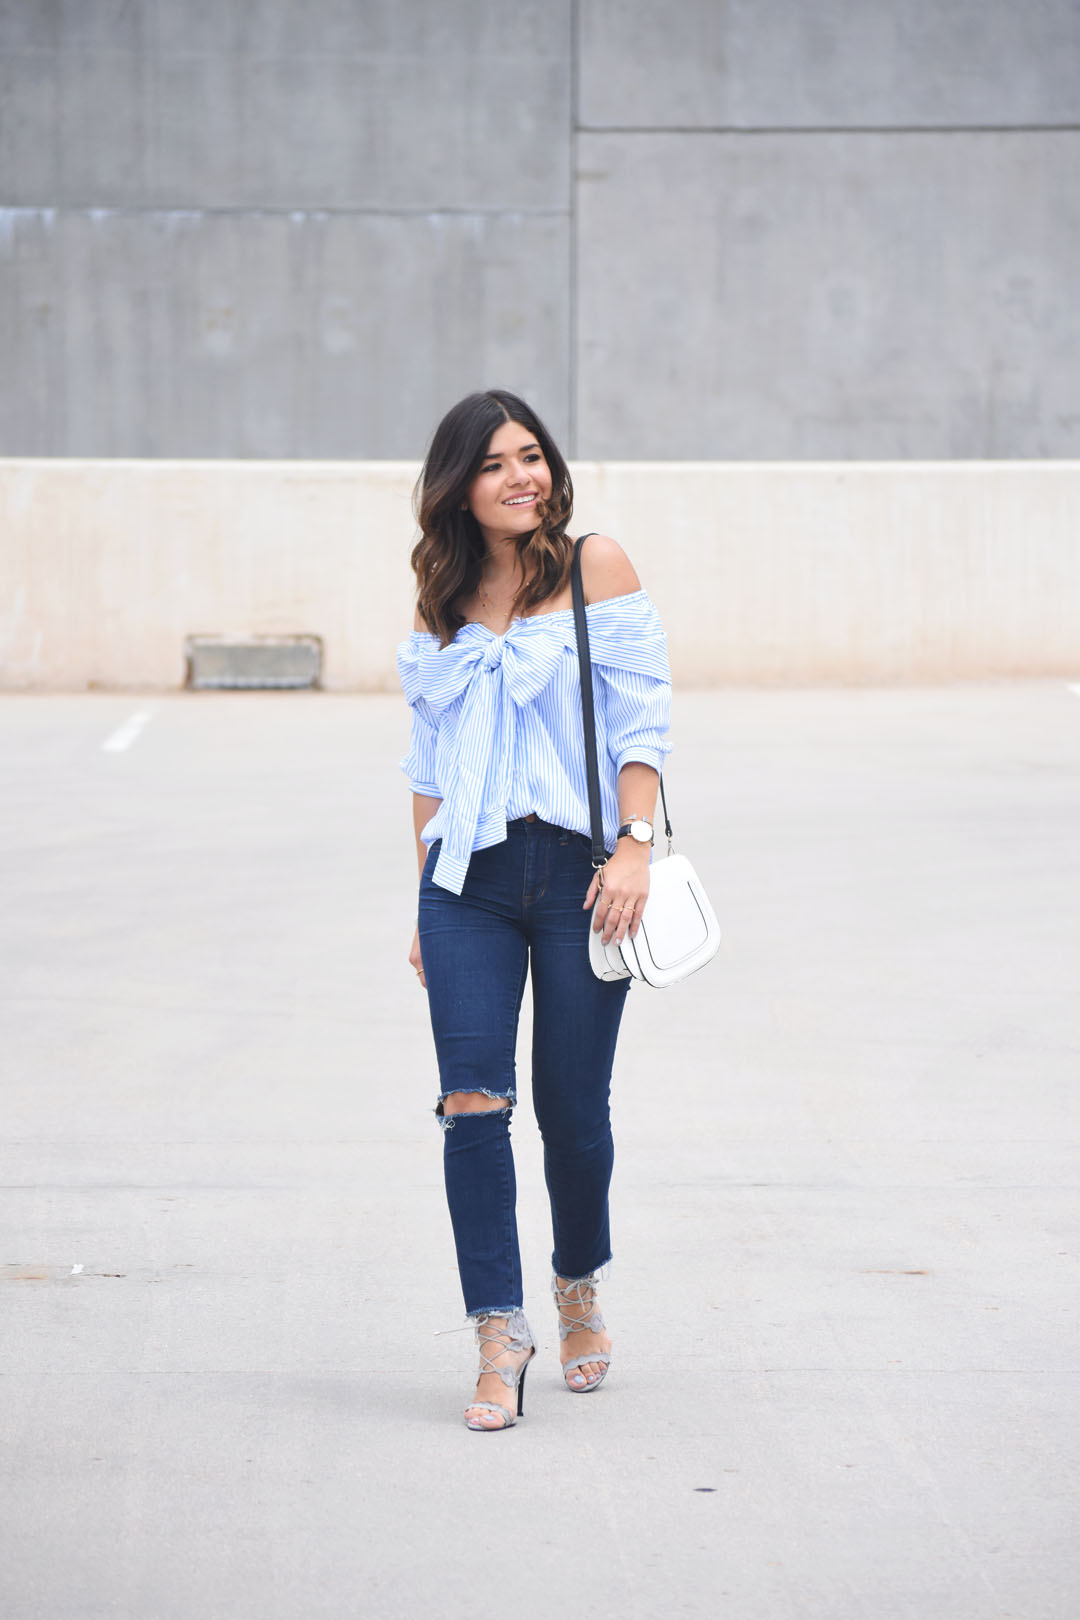 Carolina Hellal of Chic Talk wearing a tie front off the shoulder top via SheIn, Madewell jeans, and grey lace up sandals via Public Desire.